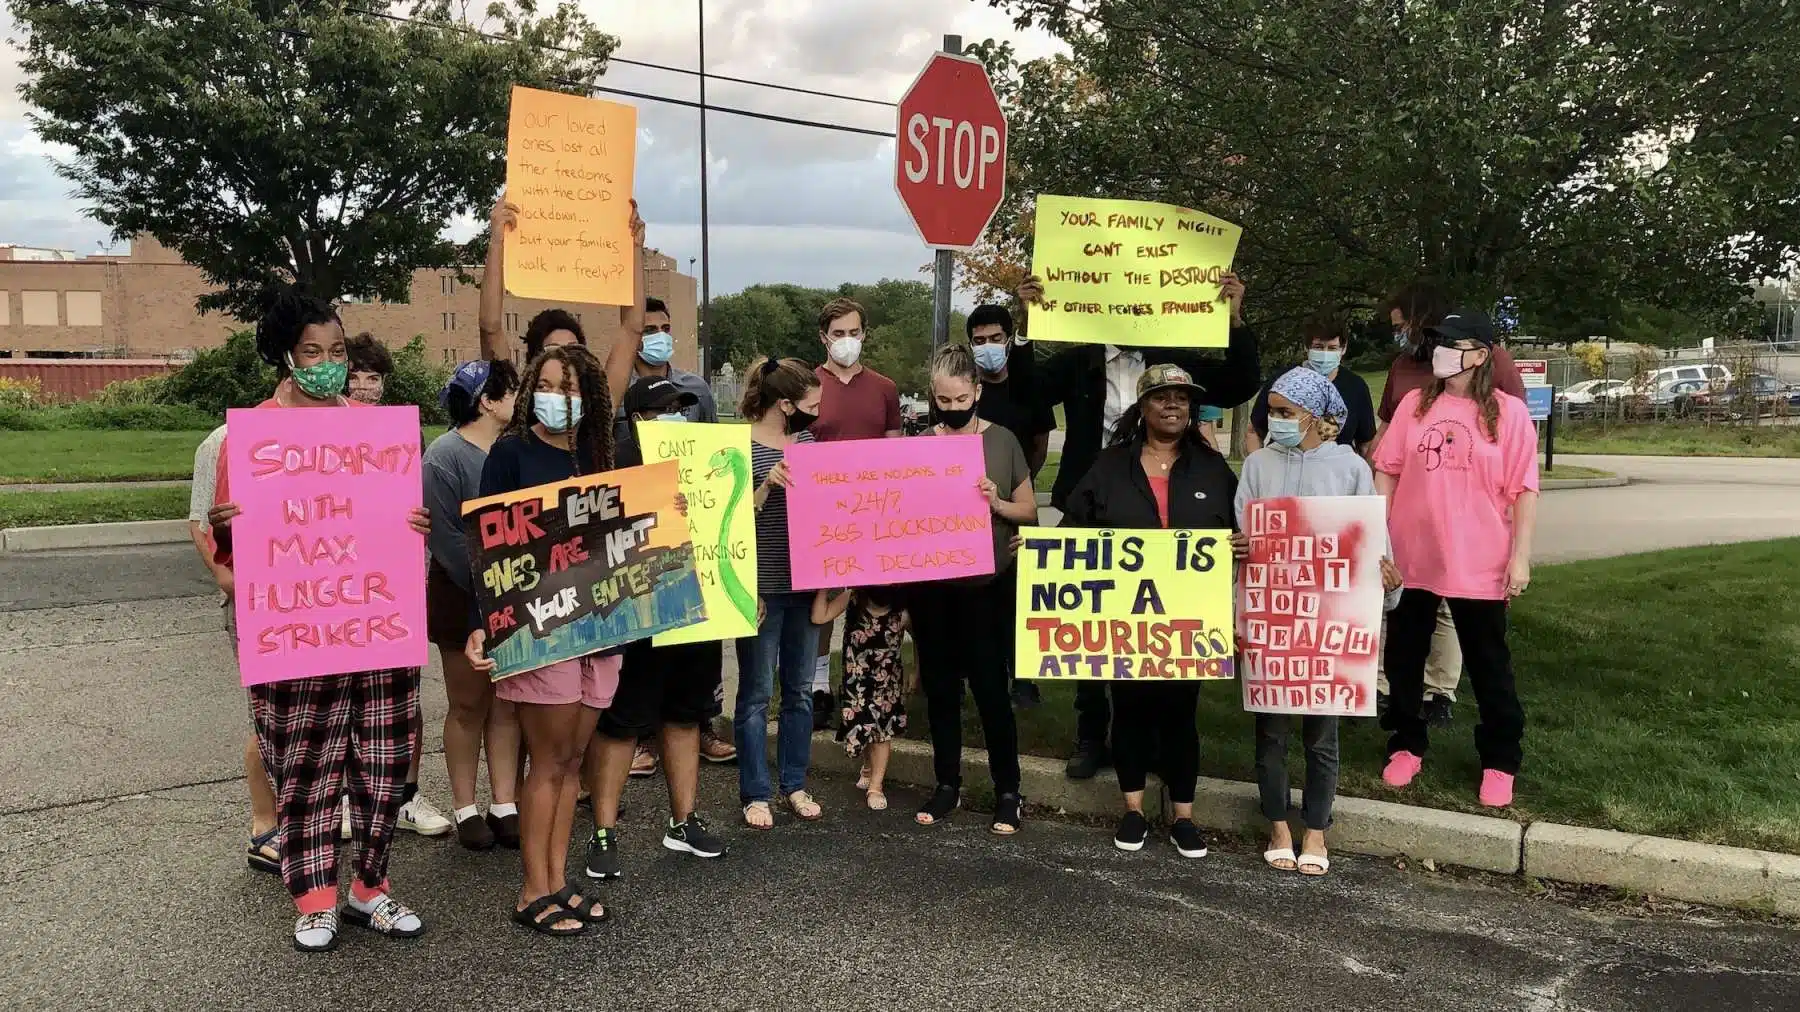 Protesters object to prison tours that treat the incarcerated as zoo animals